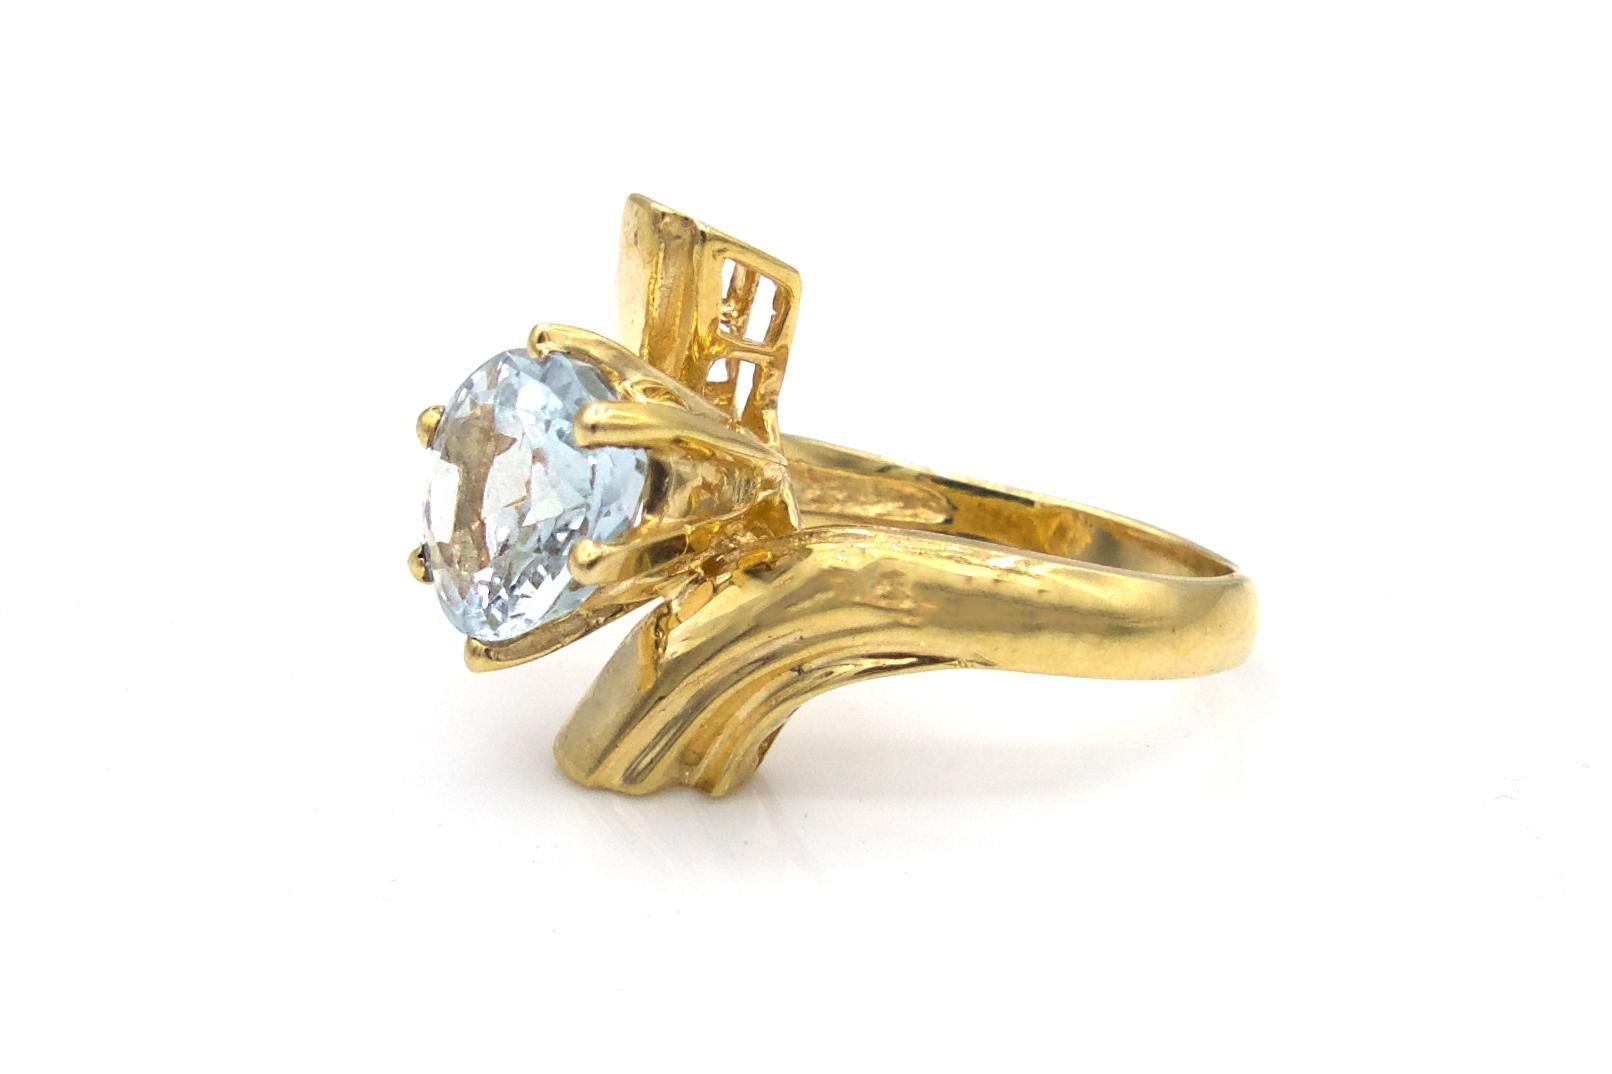 This original Ben Moses ring has a 14 karat yellow gold band that twists around the finger, featuring a unique, yet elegant modern design and an off-set light blue oval-cut Topaz at the center. The Topaz weighs in at approximately 3 Carats total.